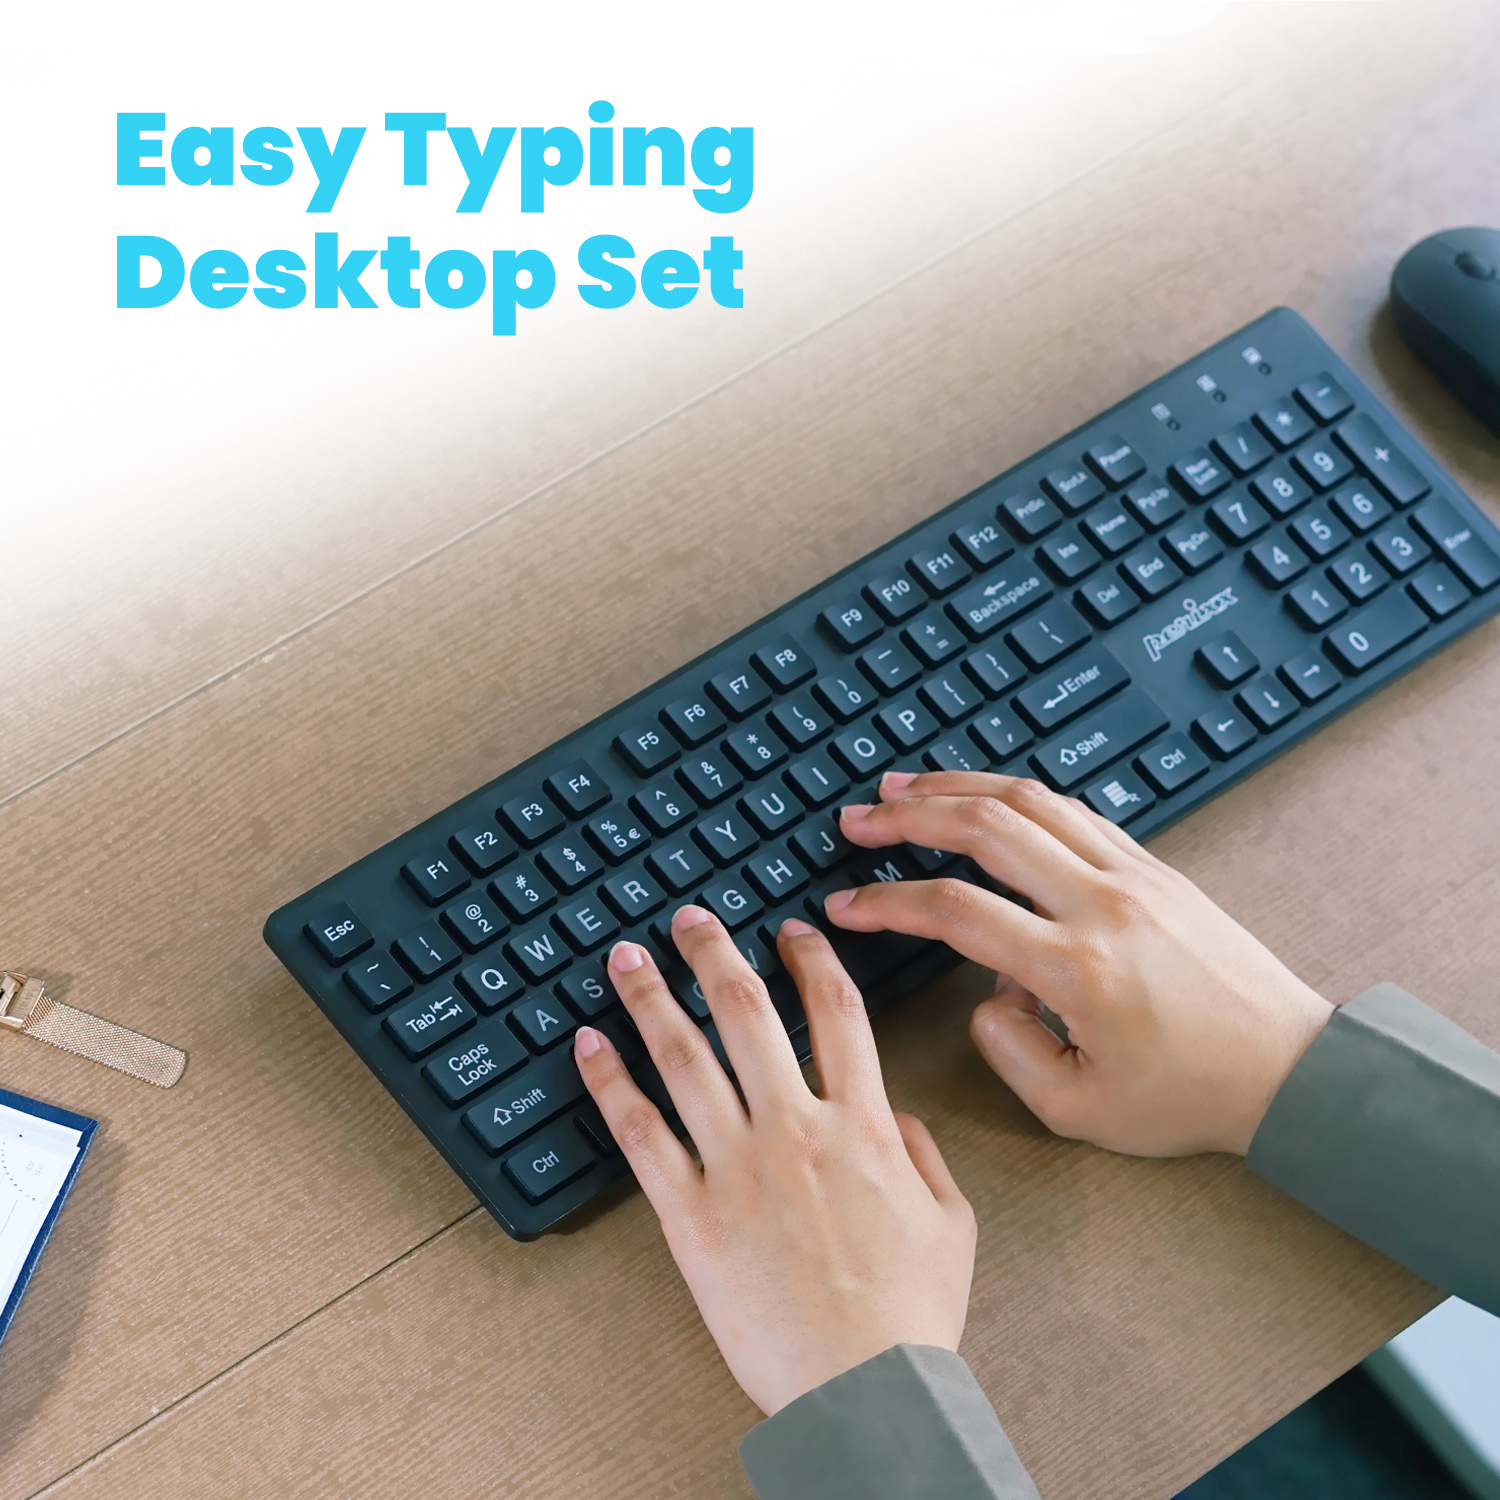 Easier Typing With Spaced Keys